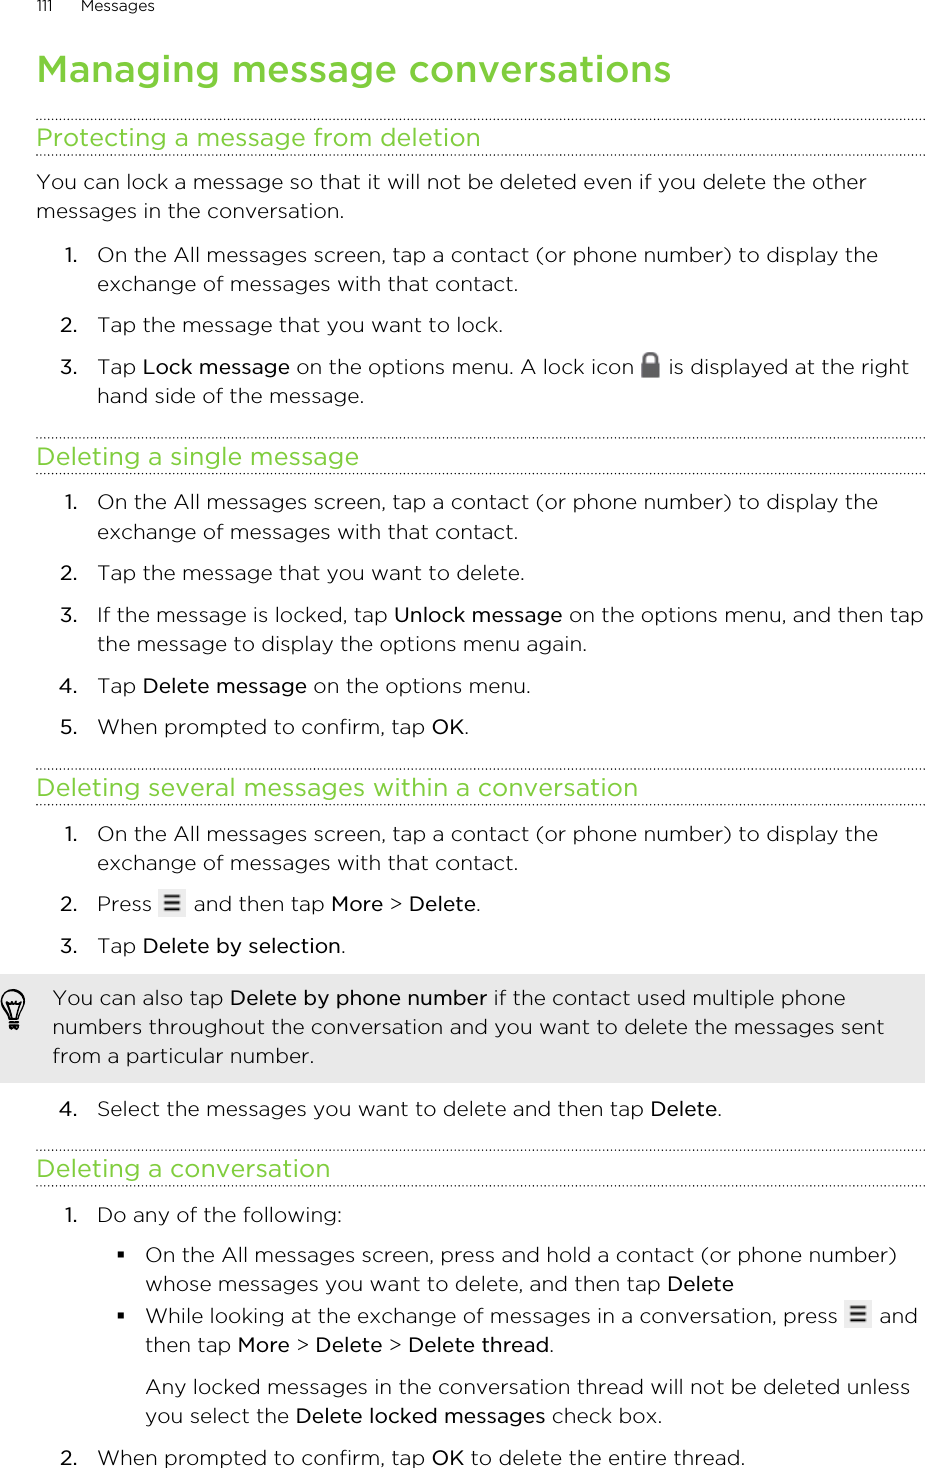 Managing message conversationsProtecting a message from deletionYou can lock a message so that it will not be deleted even if you delete the othermessages in the conversation.1. On the All messages screen, tap a contact (or phone number) to display theexchange of messages with that contact.2. Tap the message that you want to lock.3. Tap Lock message on the options menu. A lock icon   is displayed at the righthand side of the message.Deleting a single message1. On the All messages screen, tap a contact (or phone number) to display theexchange of messages with that contact.2. Tap the message that you want to delete.3. If the message is locked, tap Unlock message on the options menu, and then tapthe message to display the options menu again.4. Tap Delete message on the options menu.5. When prompted to confirm, tap OK.Deleting several messages within a conversation1. On the All messages screen, tap a contact (or phone number) to display theexchange of messages with that contact.2. Press   and then tap More &gt; Delete.3. Tap Delete by selection. You can also tap Delete by phone number if the contact used multiple phonenumbers throughout the conversation and you want to delete the messages sentfrom a particular number.4. Select the messages you want to delete and then tap Delete.Deleting a conversation1. Do any of the following:§On the All messages screen, press and hold a contact (or phone number)whose messages you want to delete, and then tap Delete§While looking at the exchange of messages in a conversation, press   andthen tap More &gt; Delete &gt; Delete thread.Any locked messages in the conversation thread will not be deleted unlessyou select the Delete locked messages check box.2. When prompted to confirm, tap OK to delete the entire thread.111 Messages